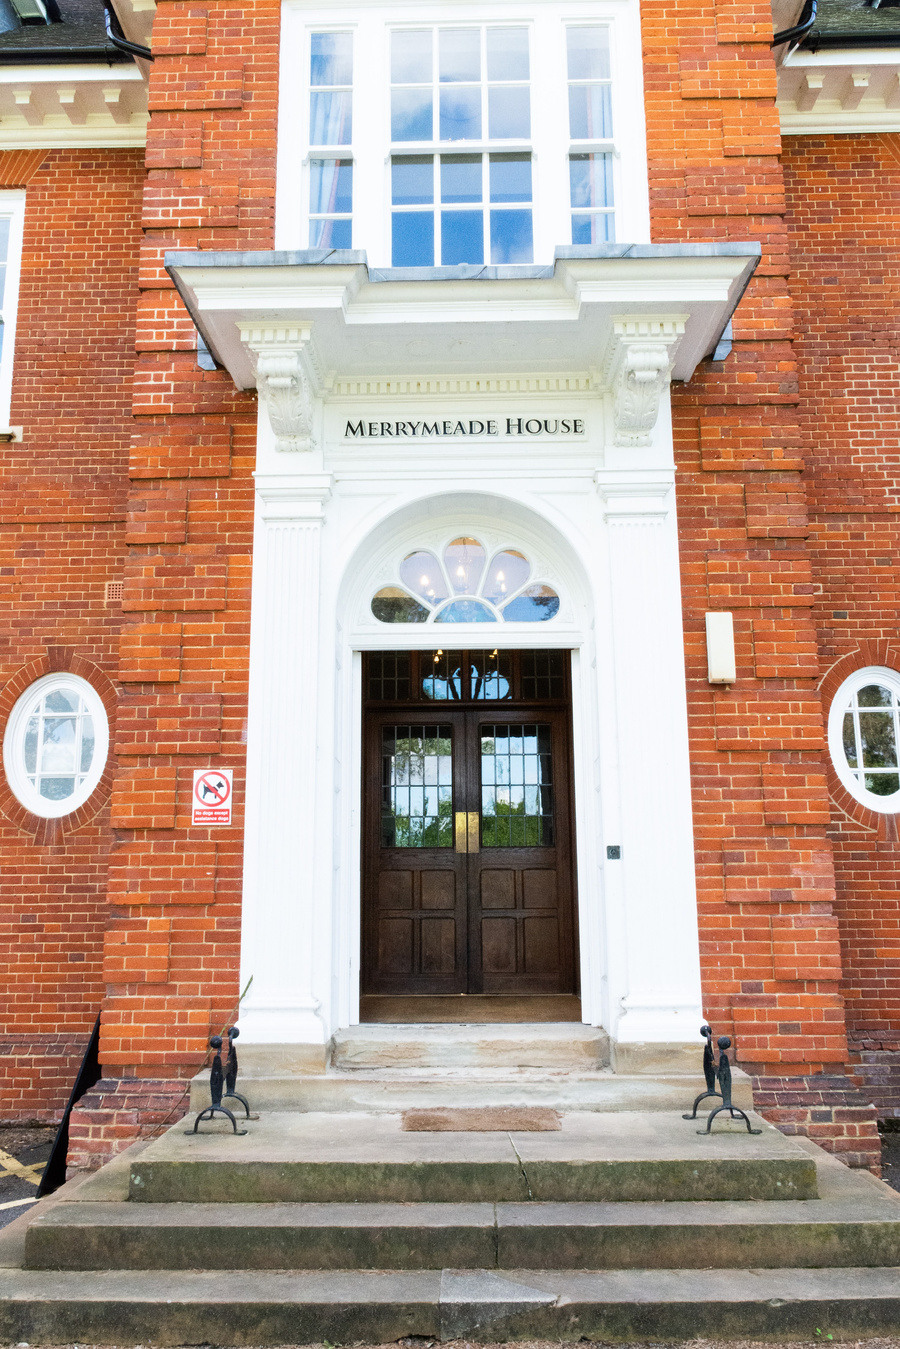 the entrance to Merrymeade House, a red brick building with steps leading up to a decorative porch area